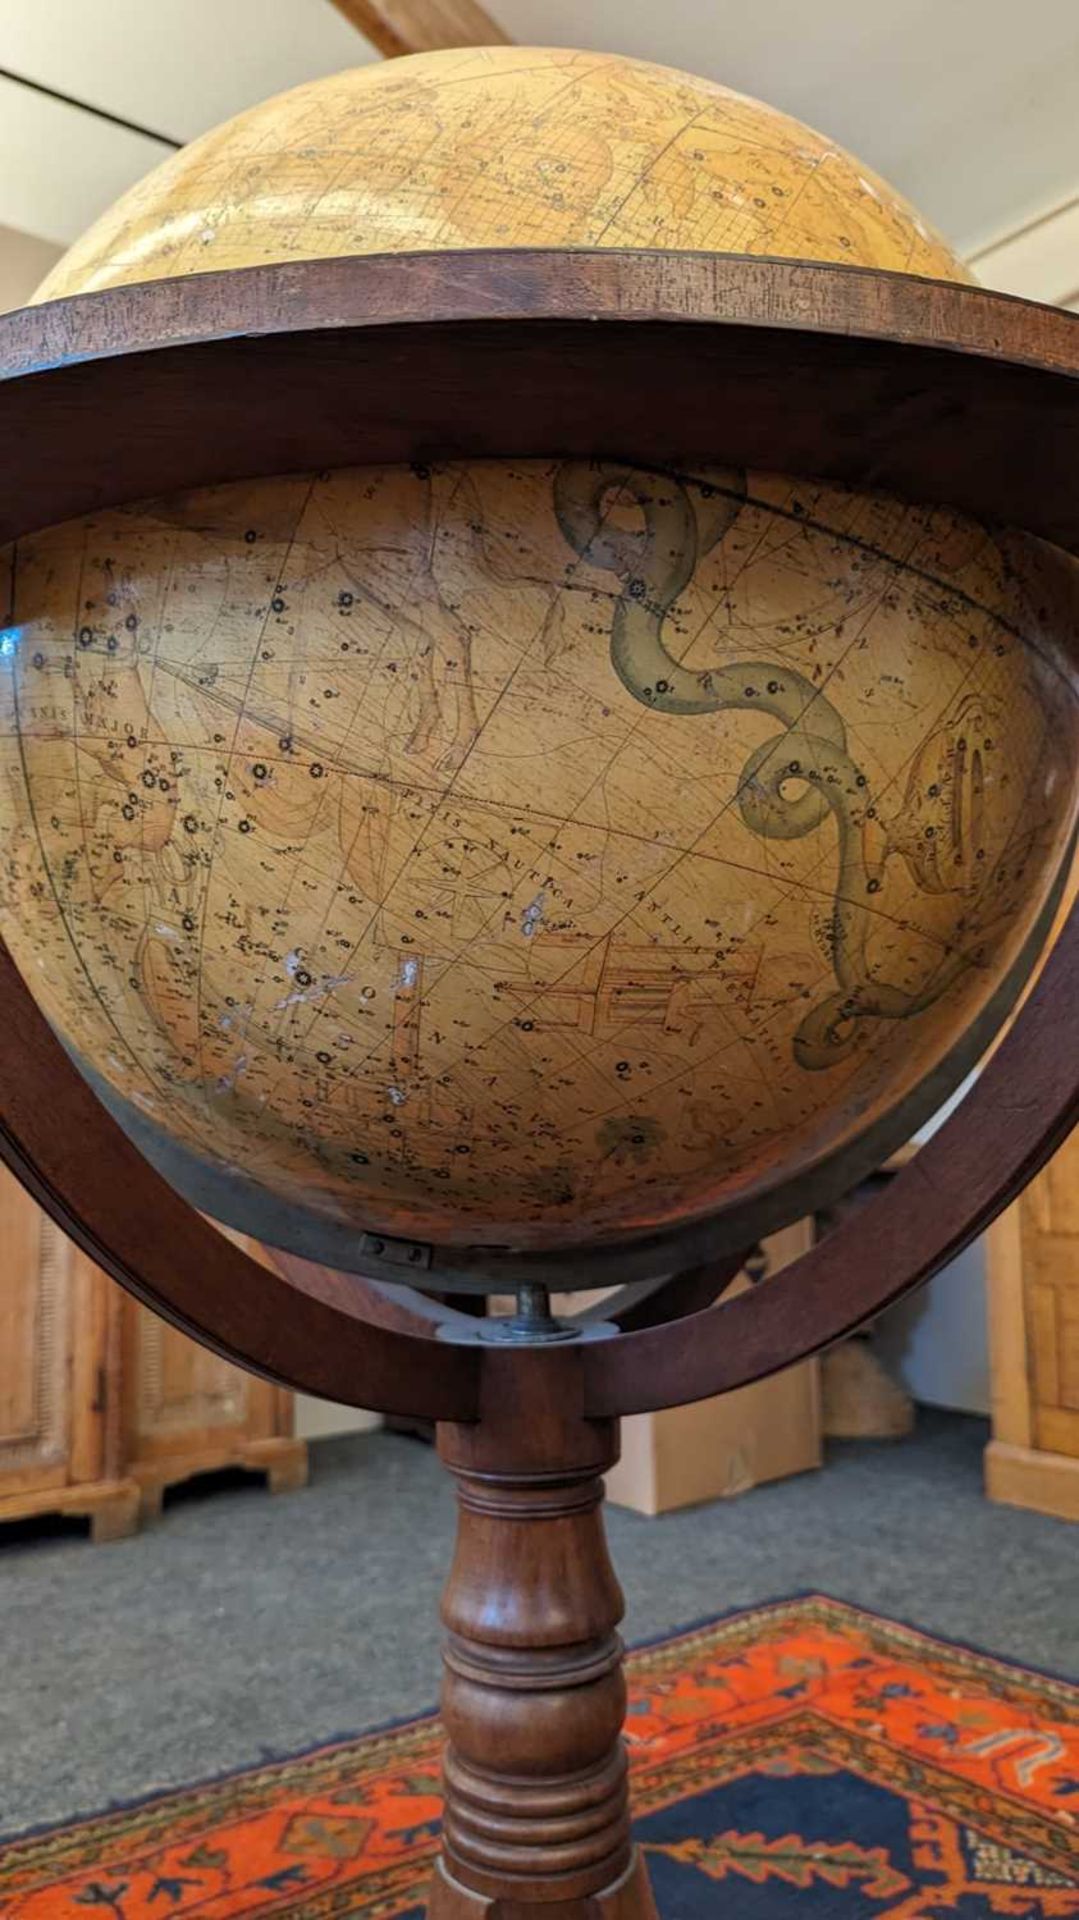 A large celestial library globe by J & W Cary, - Image 63 of 84